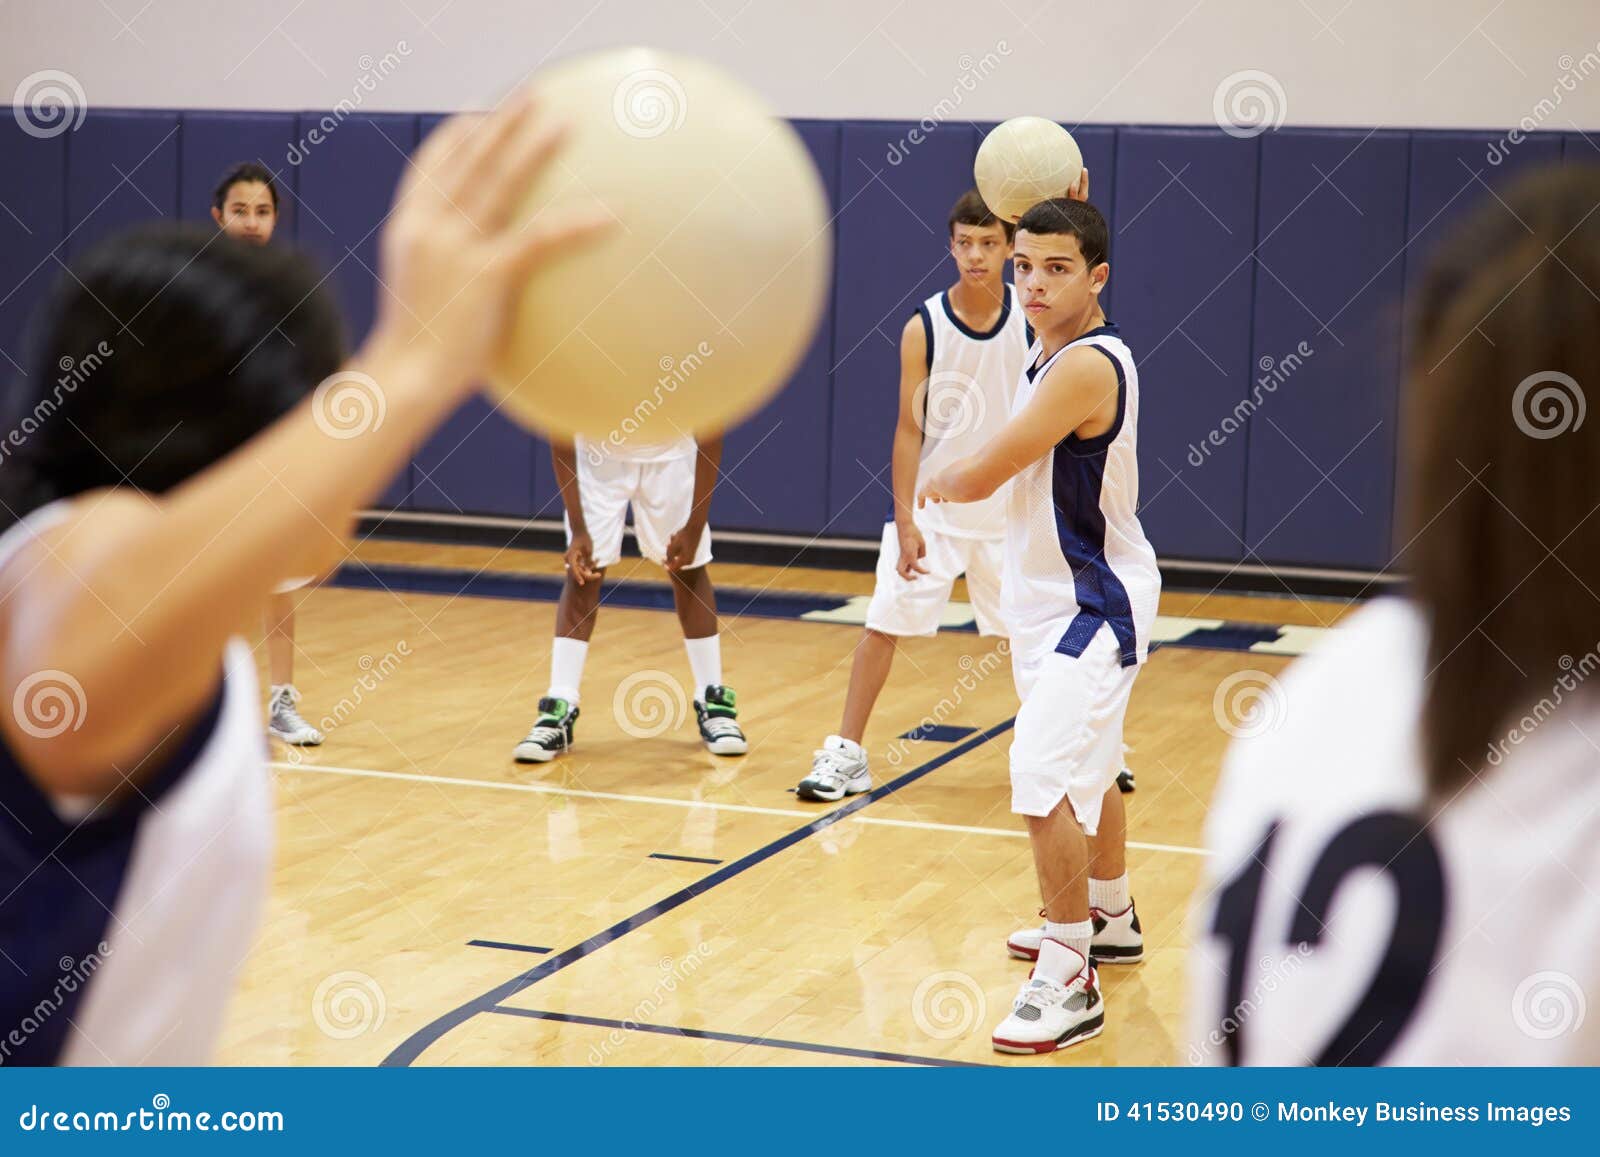 high school students playing dodge ball in gym